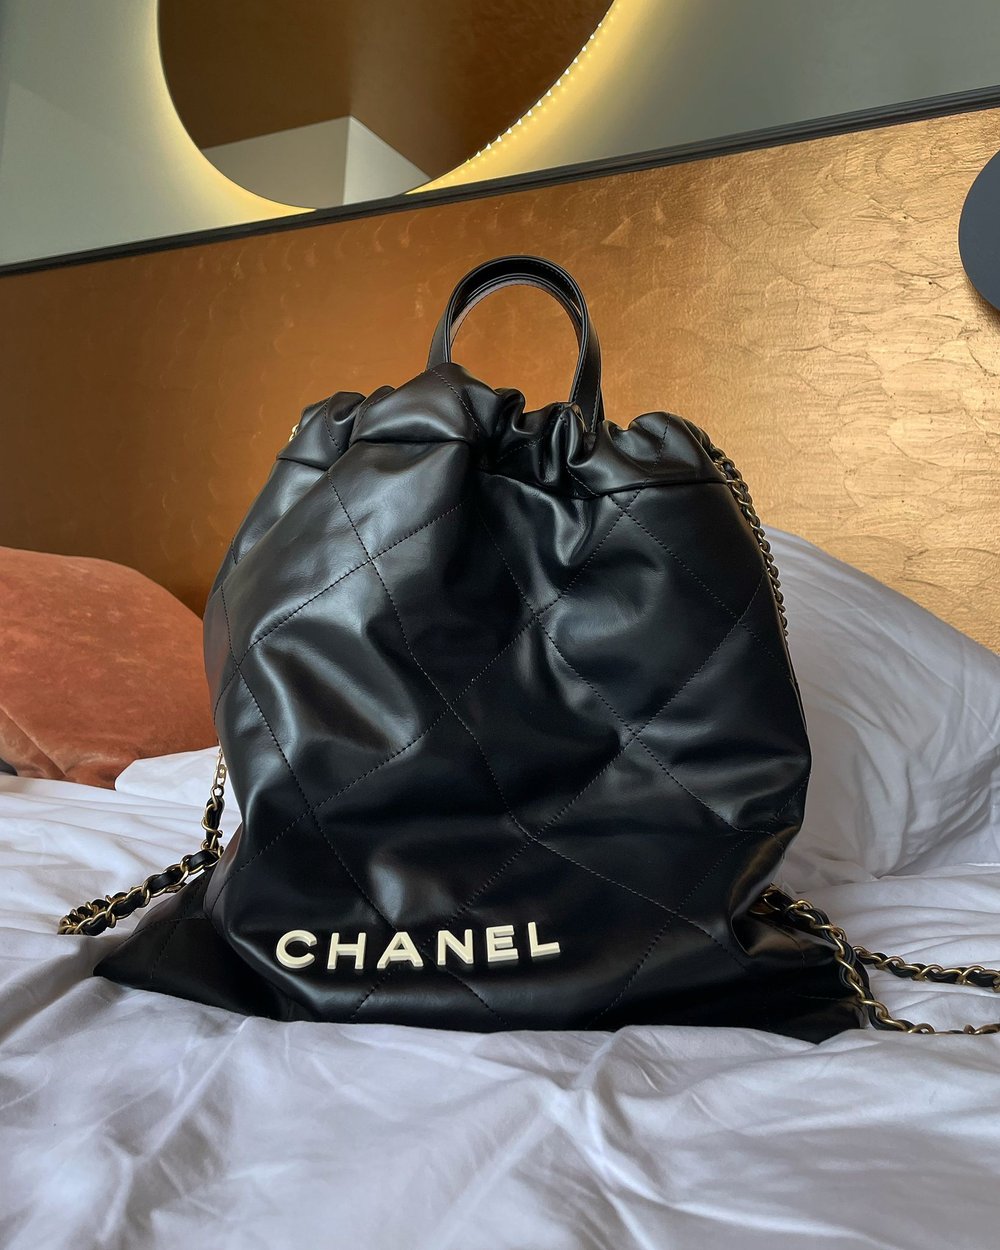 Chanel: Hands On With the New 22 Bag — Parisian Sweet